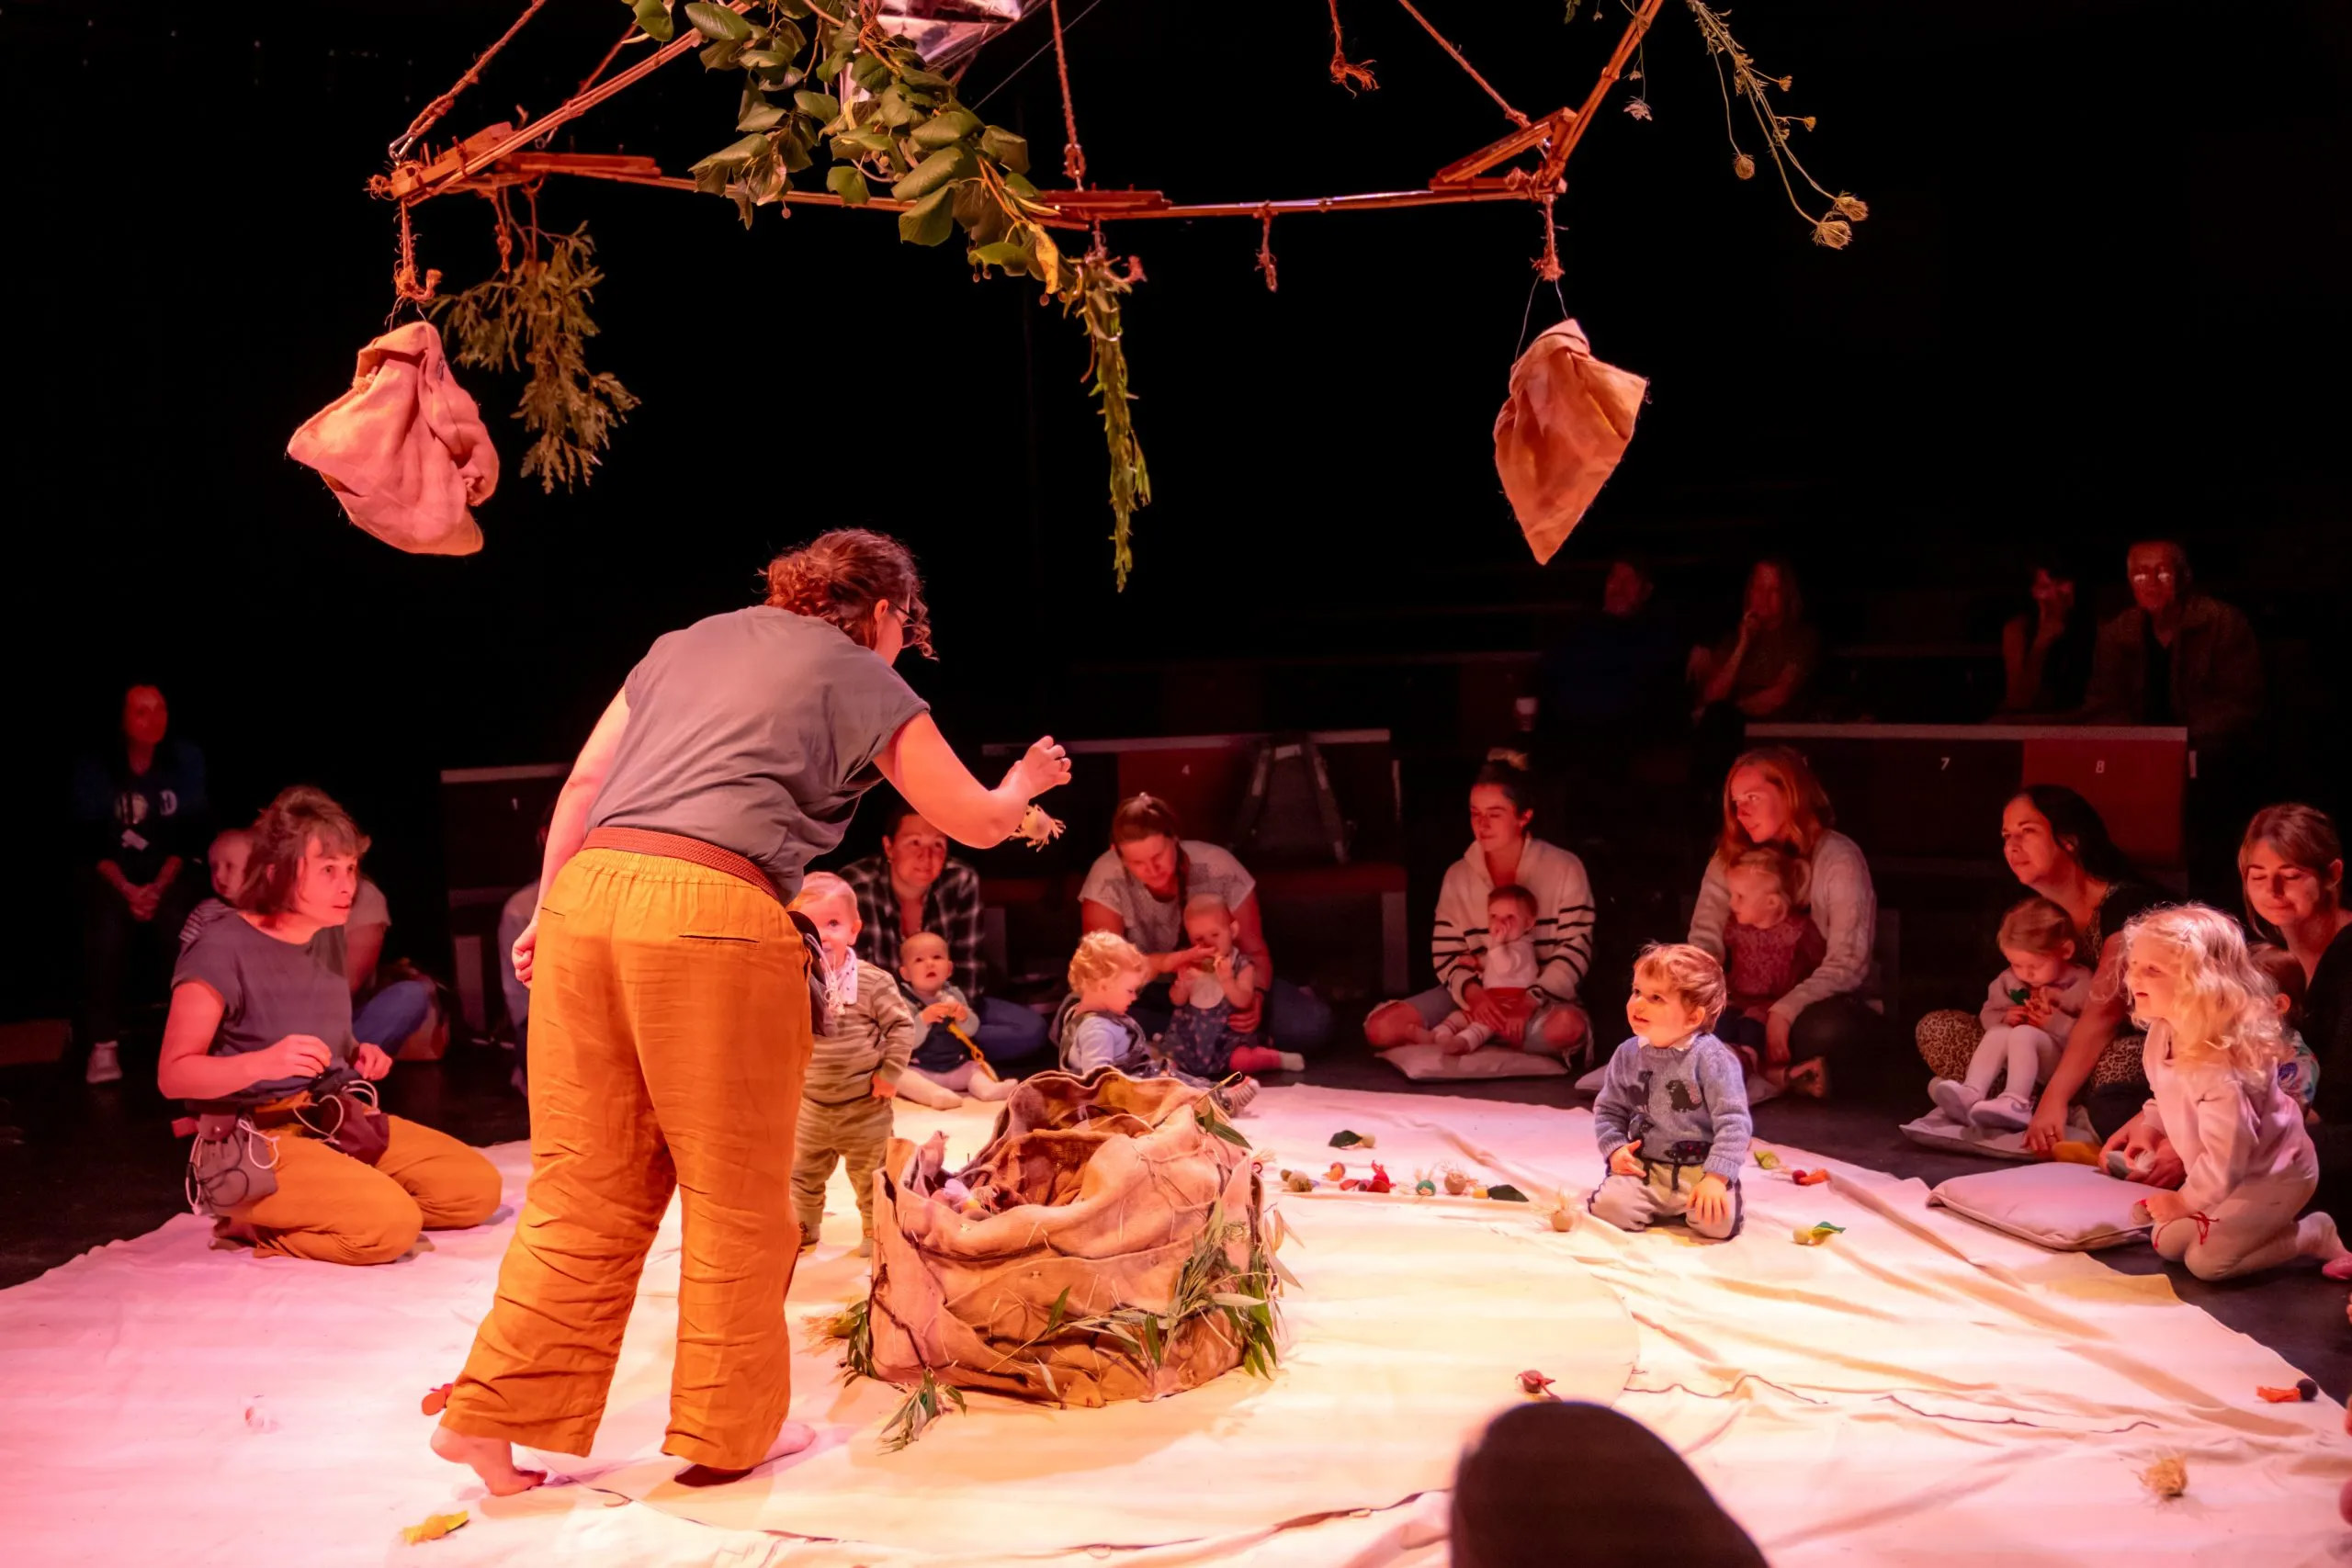 An actor on a stage in the round surrounded by an audience of infants with their parents.